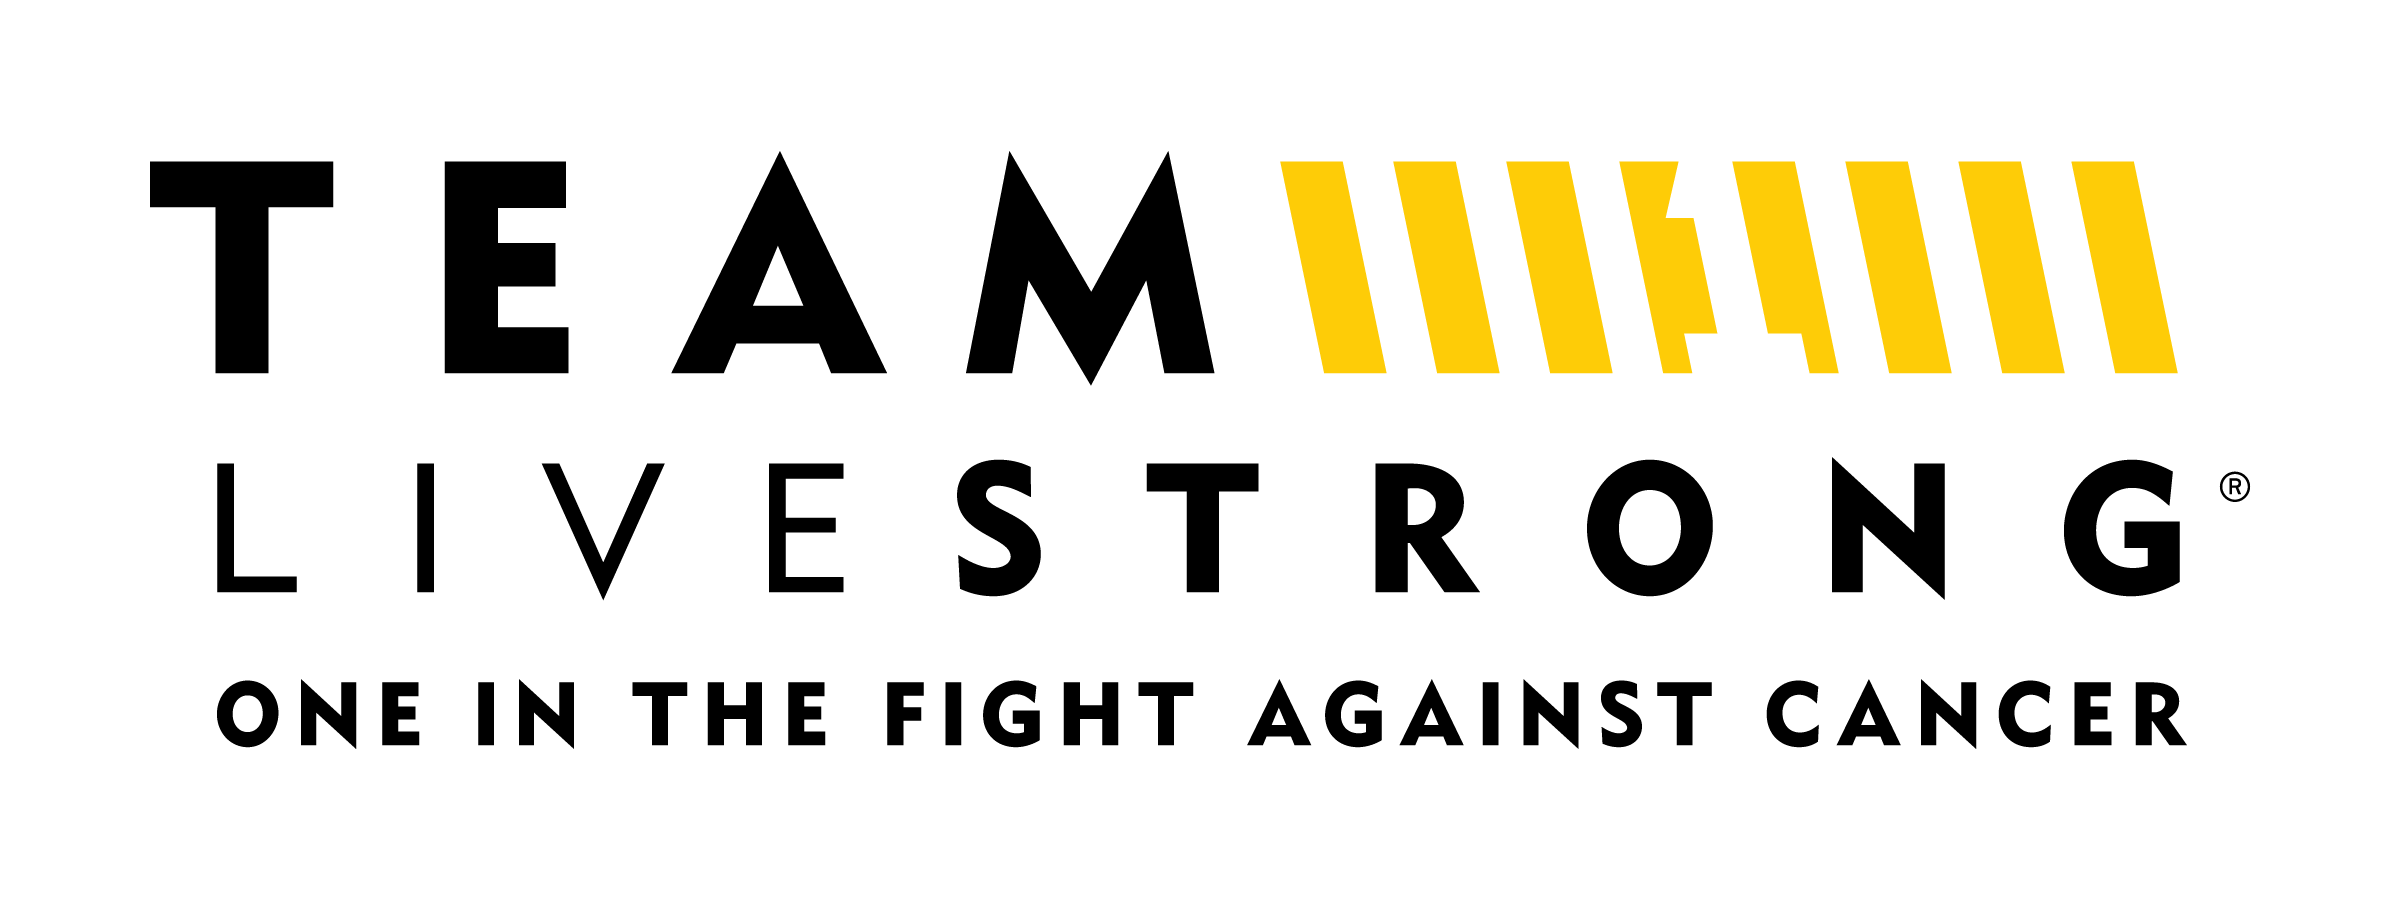 Live STRONG Logo - NFL Veterans to Go Over the Edge with Team LIVESTRONG | 3BL Media